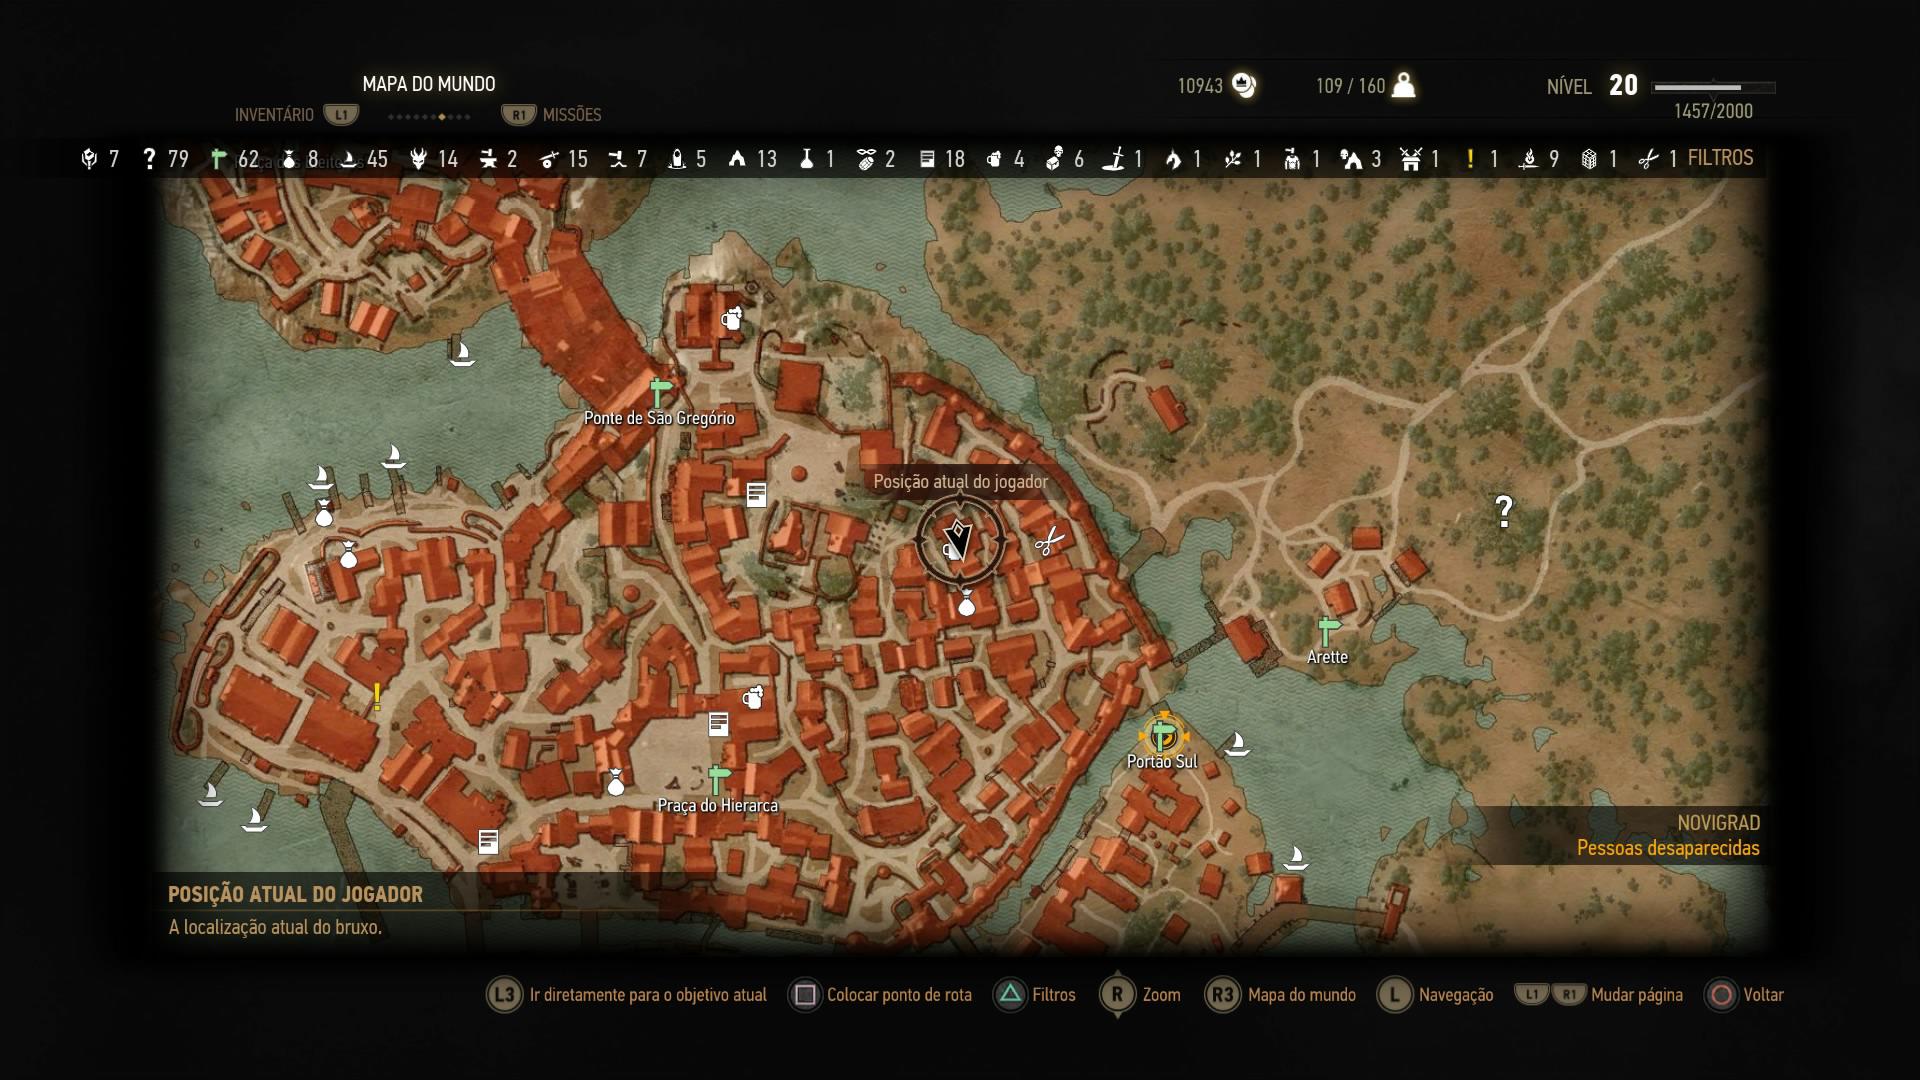 Witcher 3 Gwent Card Locations Map